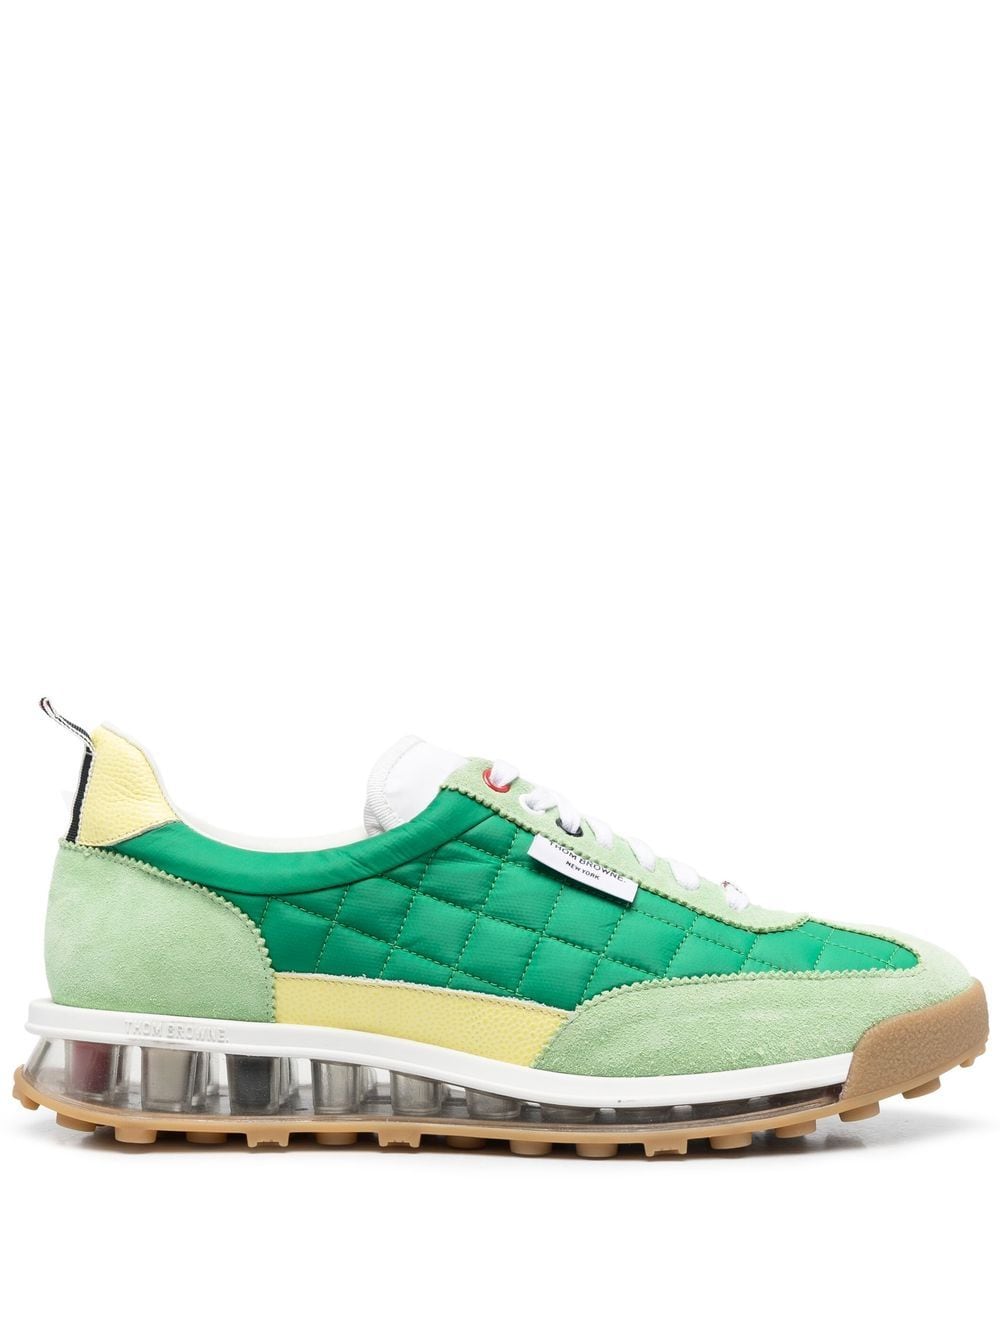 Thom Browne Tech Runner quilted sneakers - Green von Thom Browne